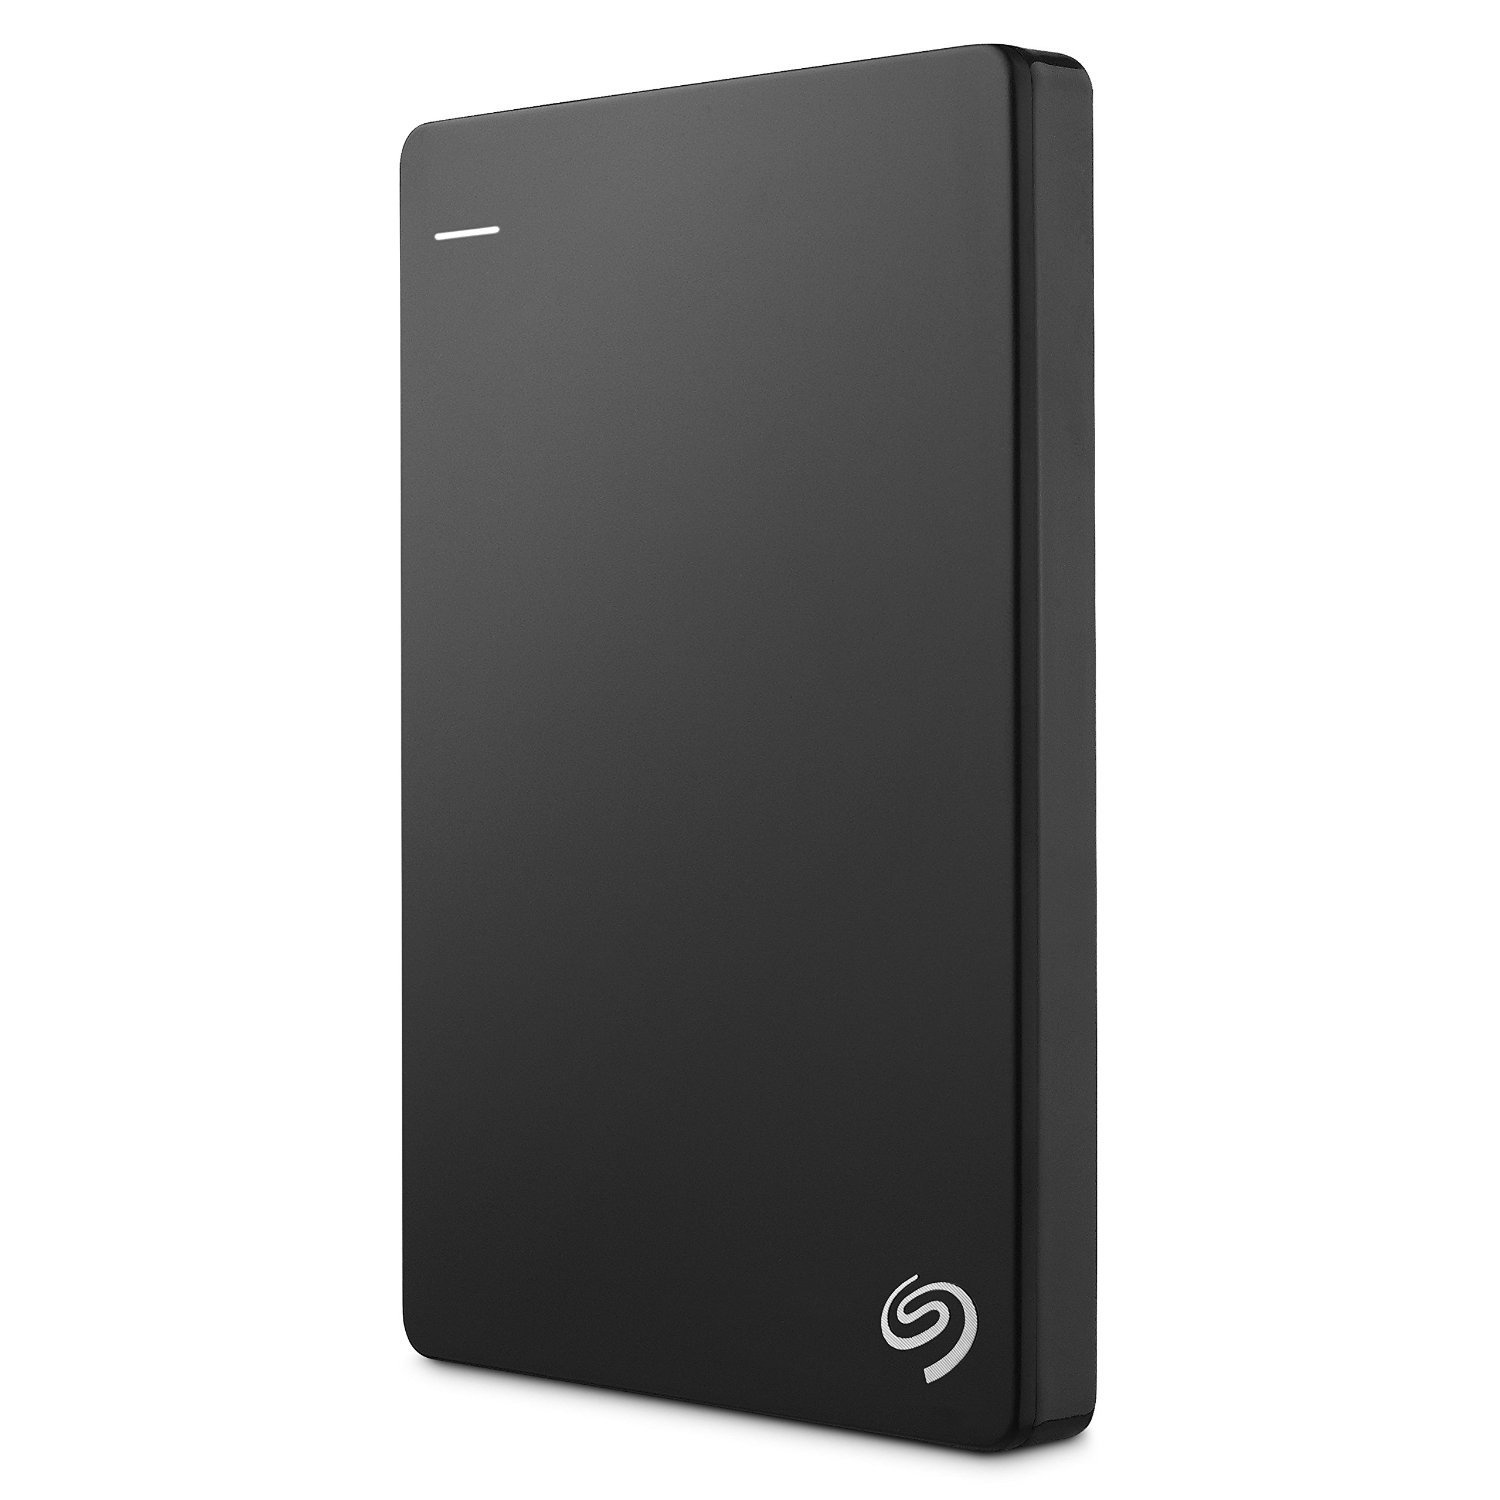 Seagate external hard drive being formatted